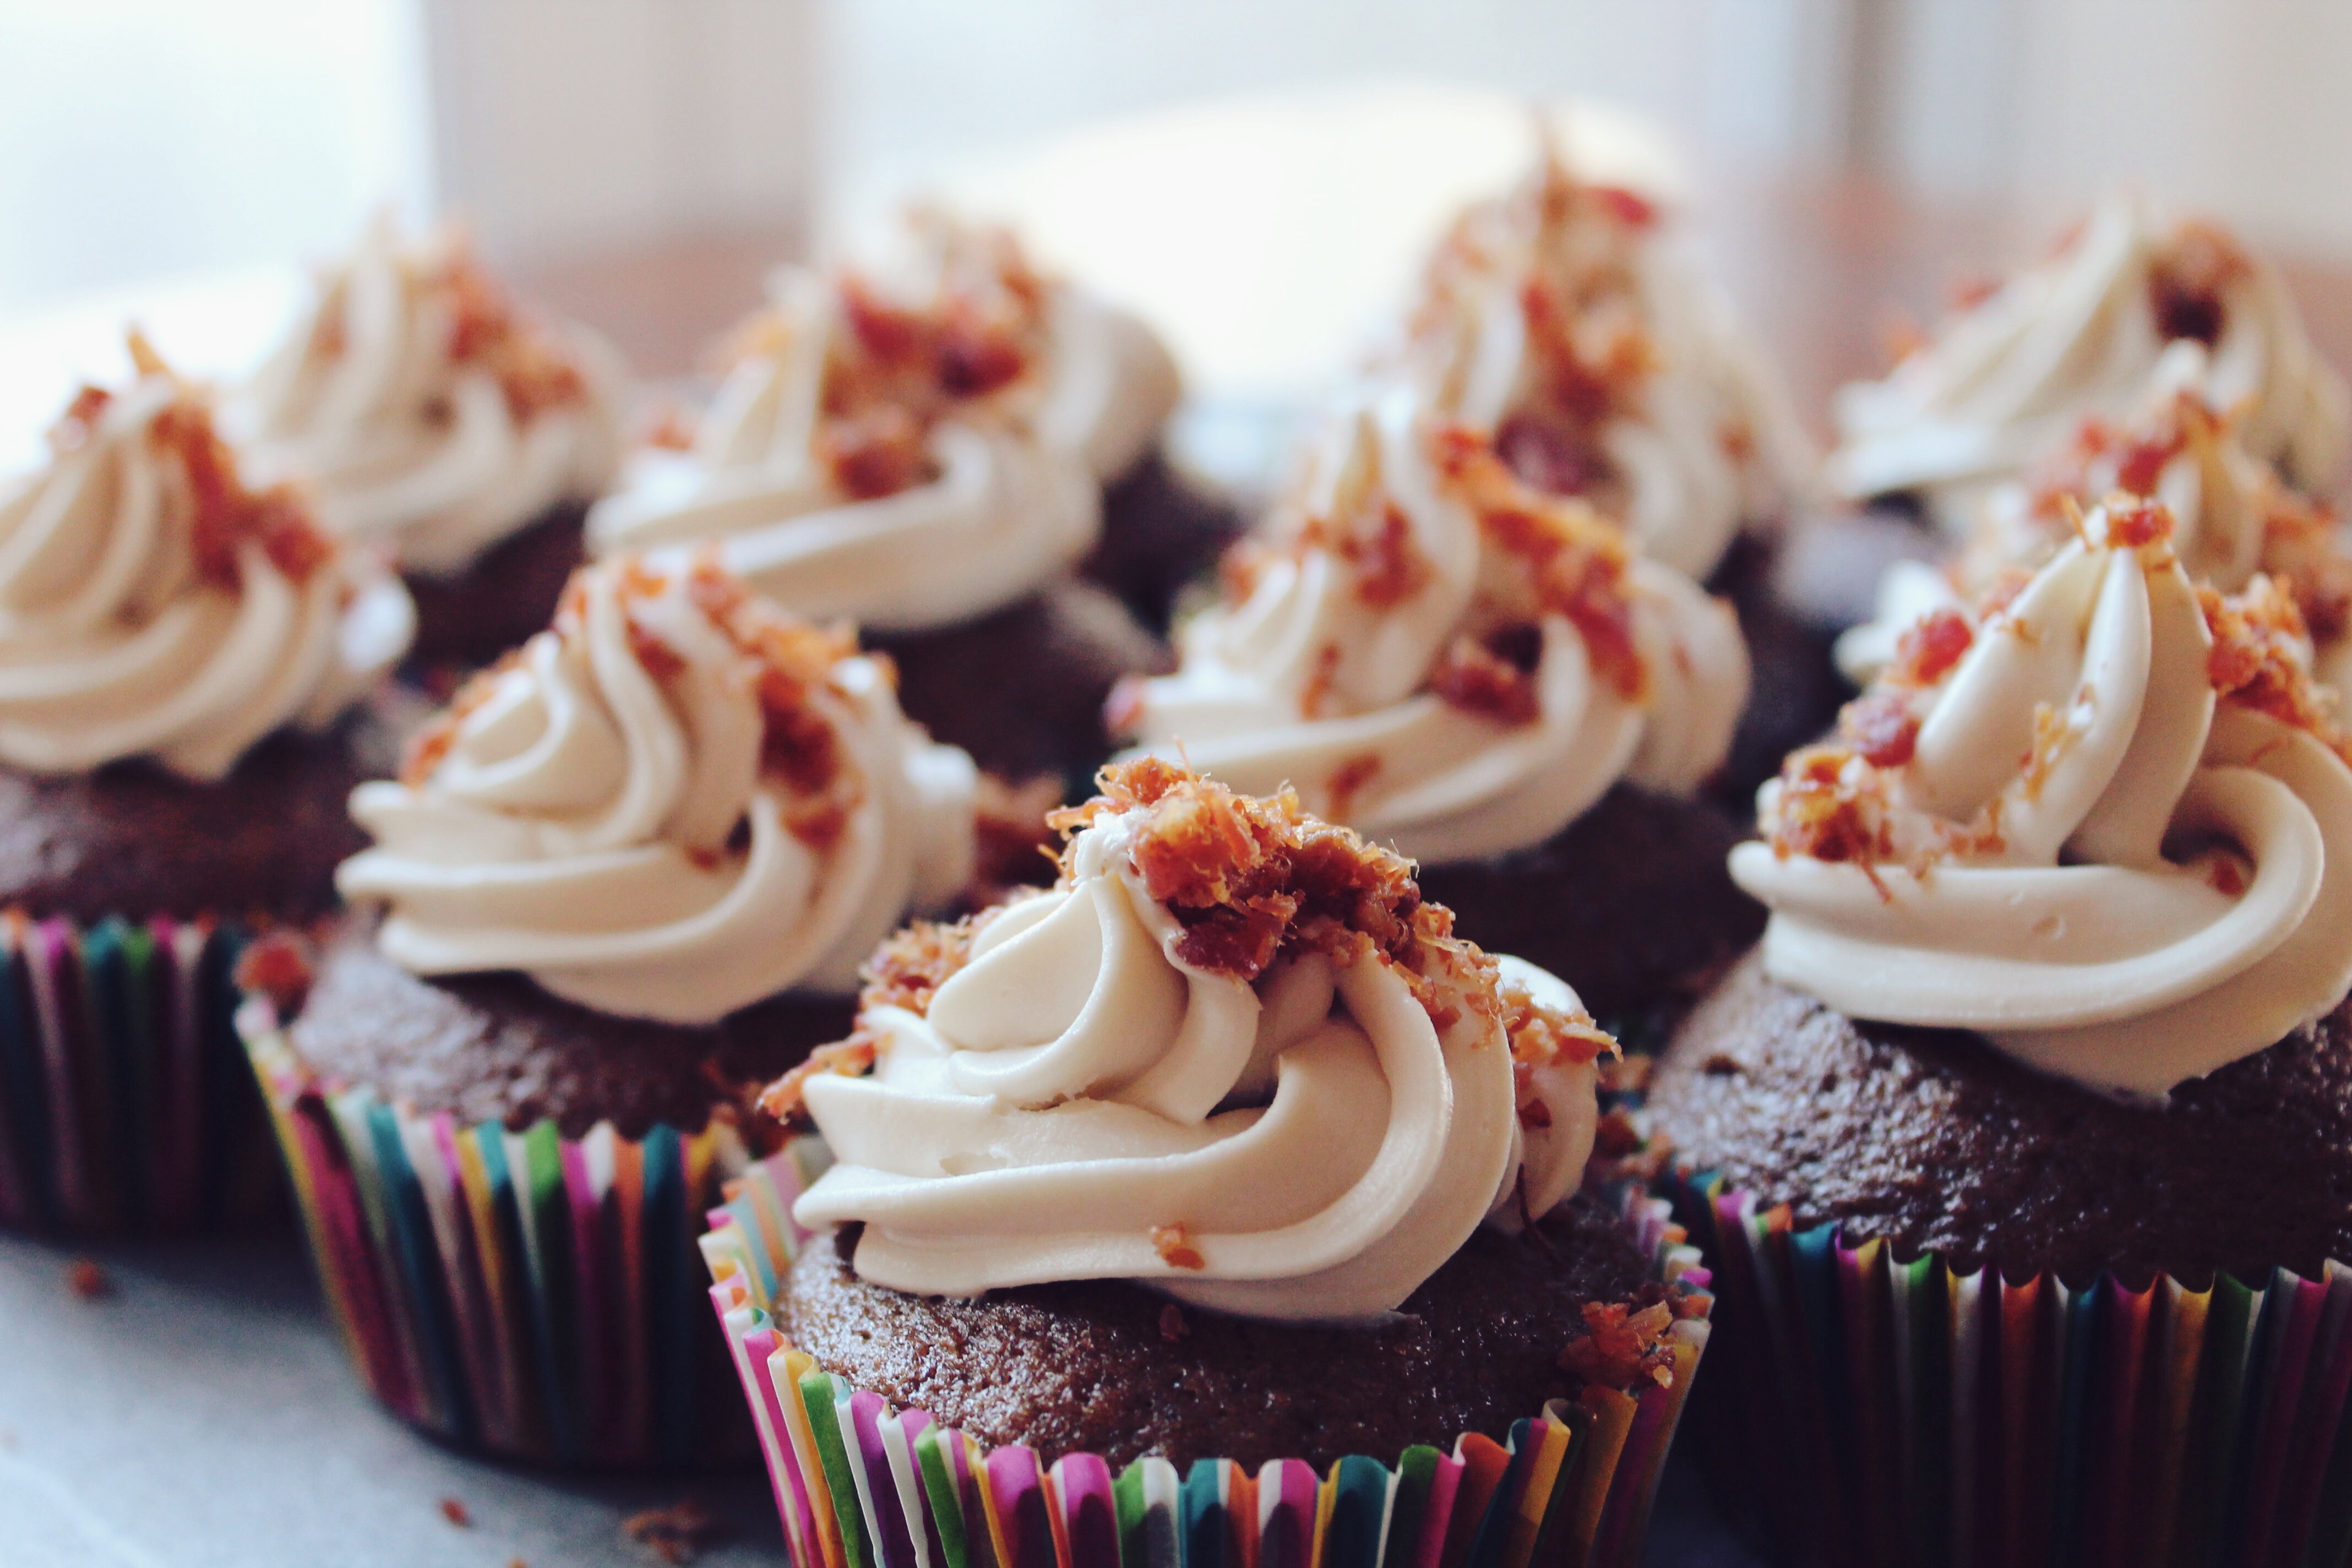 A bunch of chocolate cupckes with white icing and bacon bits on top.